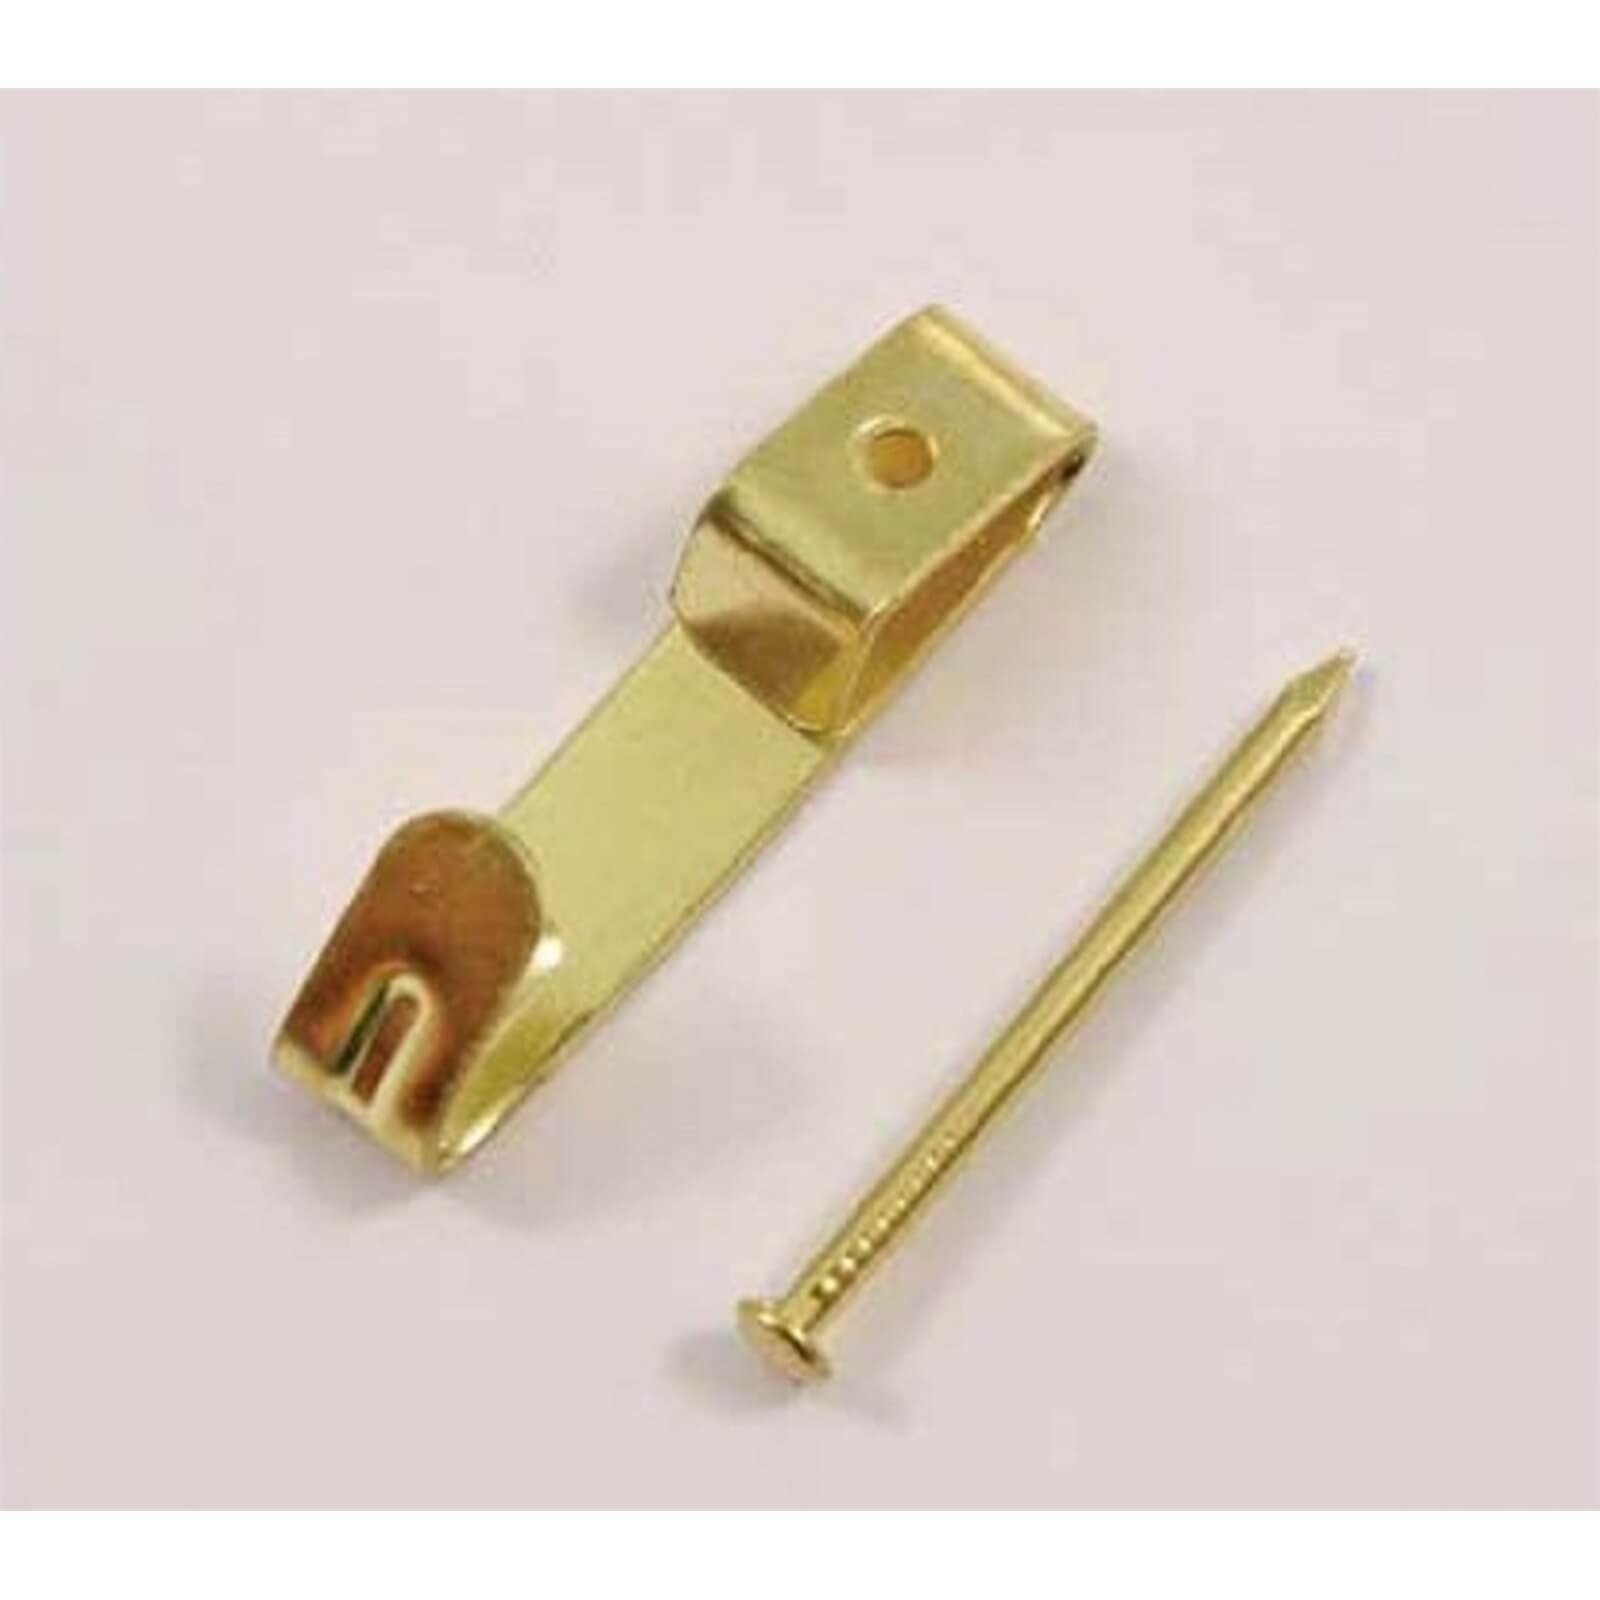 Small Picture Hook - Brass - 25 Pack